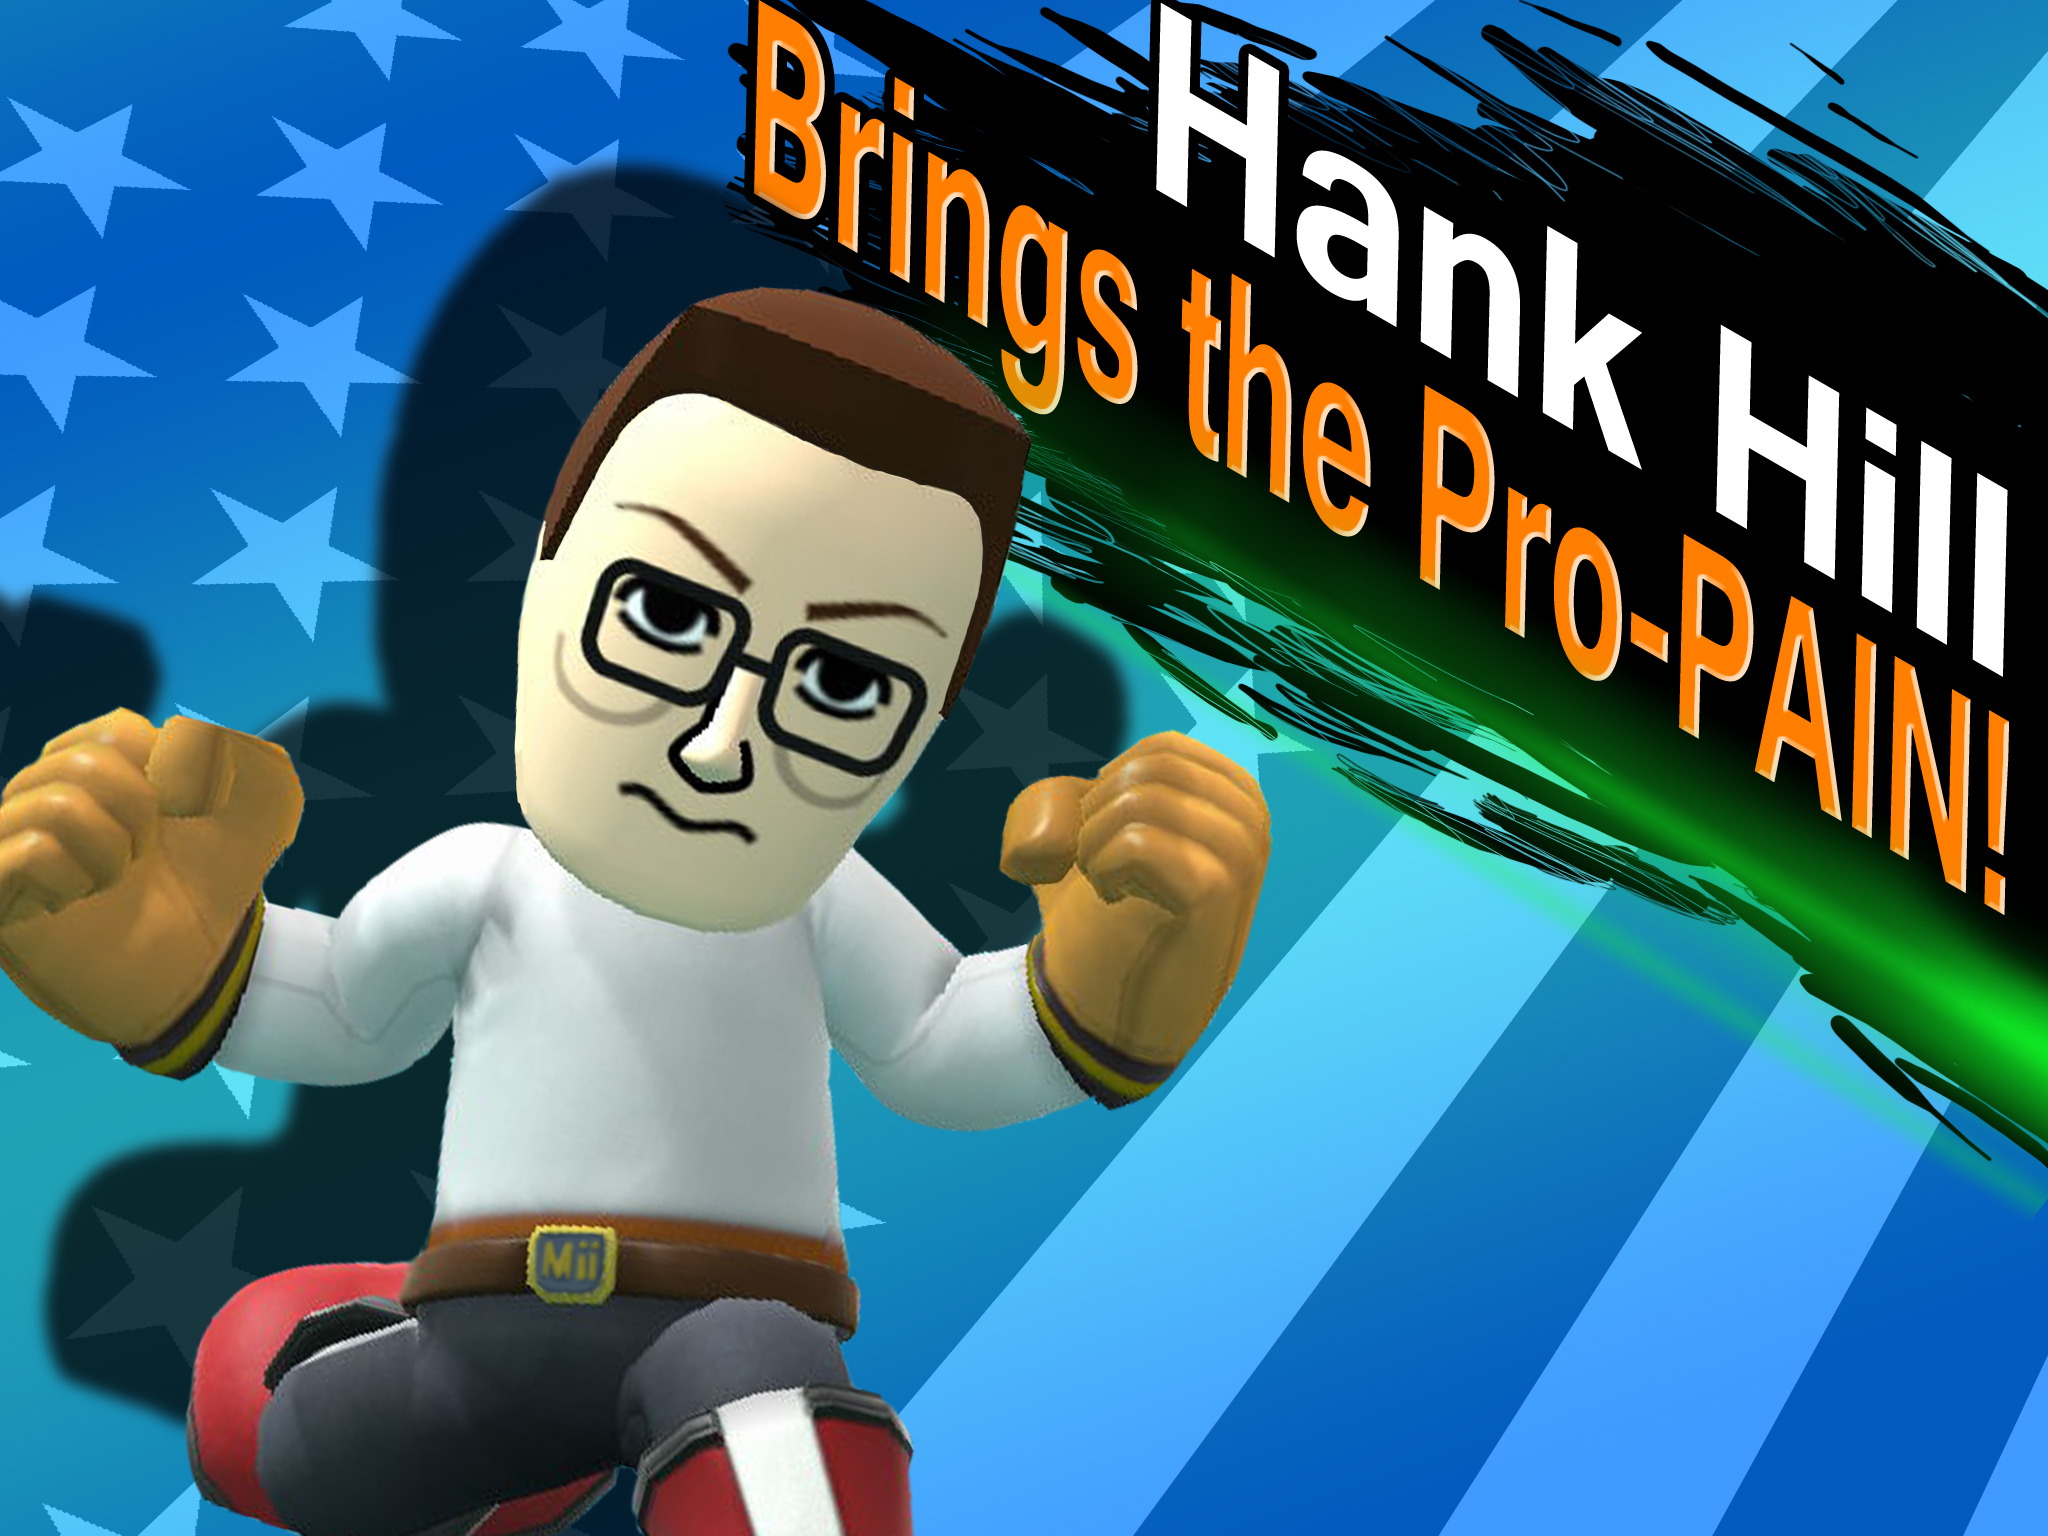 Hank Hill Brings The Pro Pain By Nickguillory